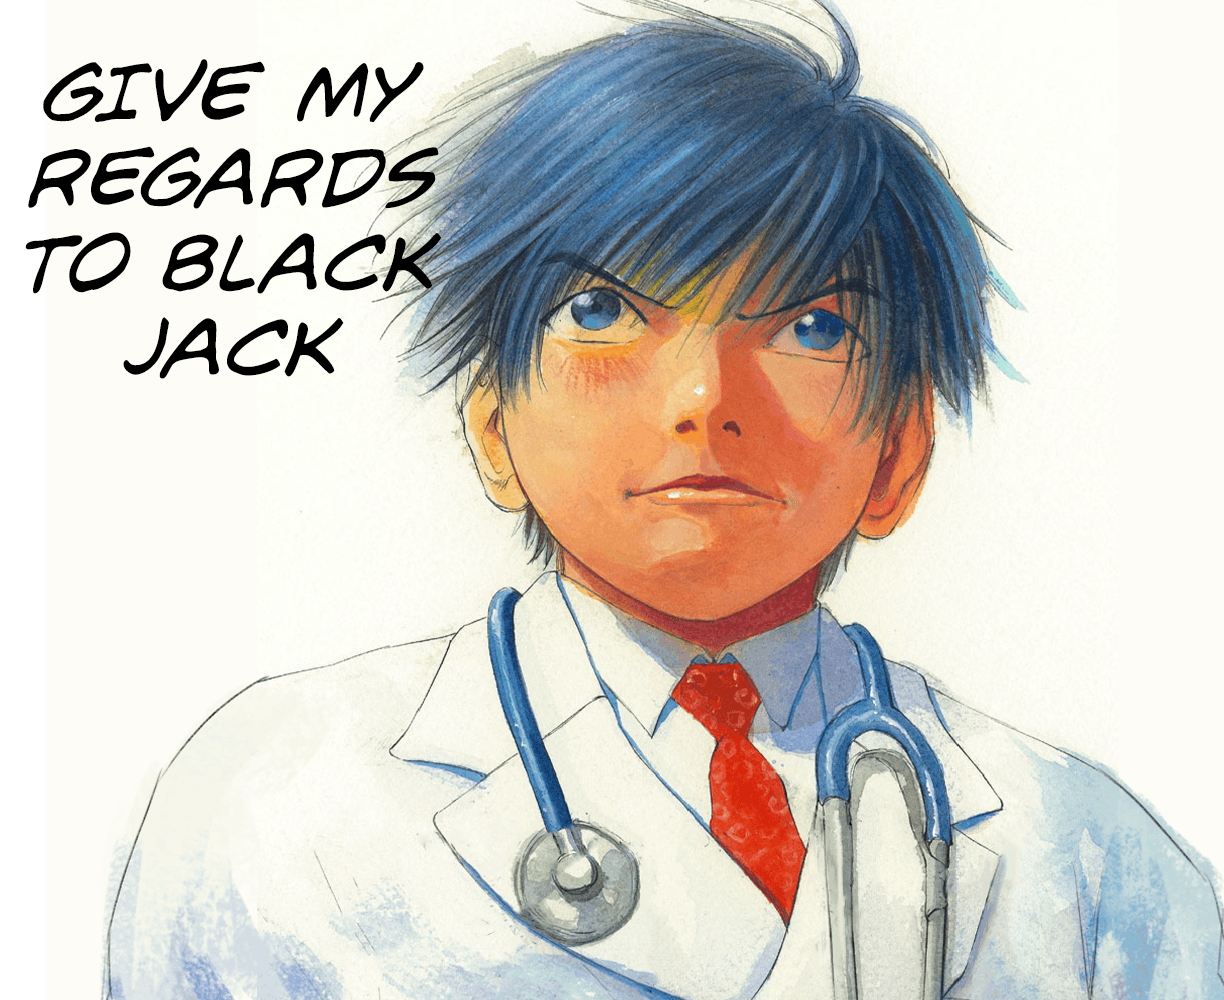 The cover art for the episode You Just Try Too Hard from the comics series Give My Regards to Black Jack, which is number 51 in the series